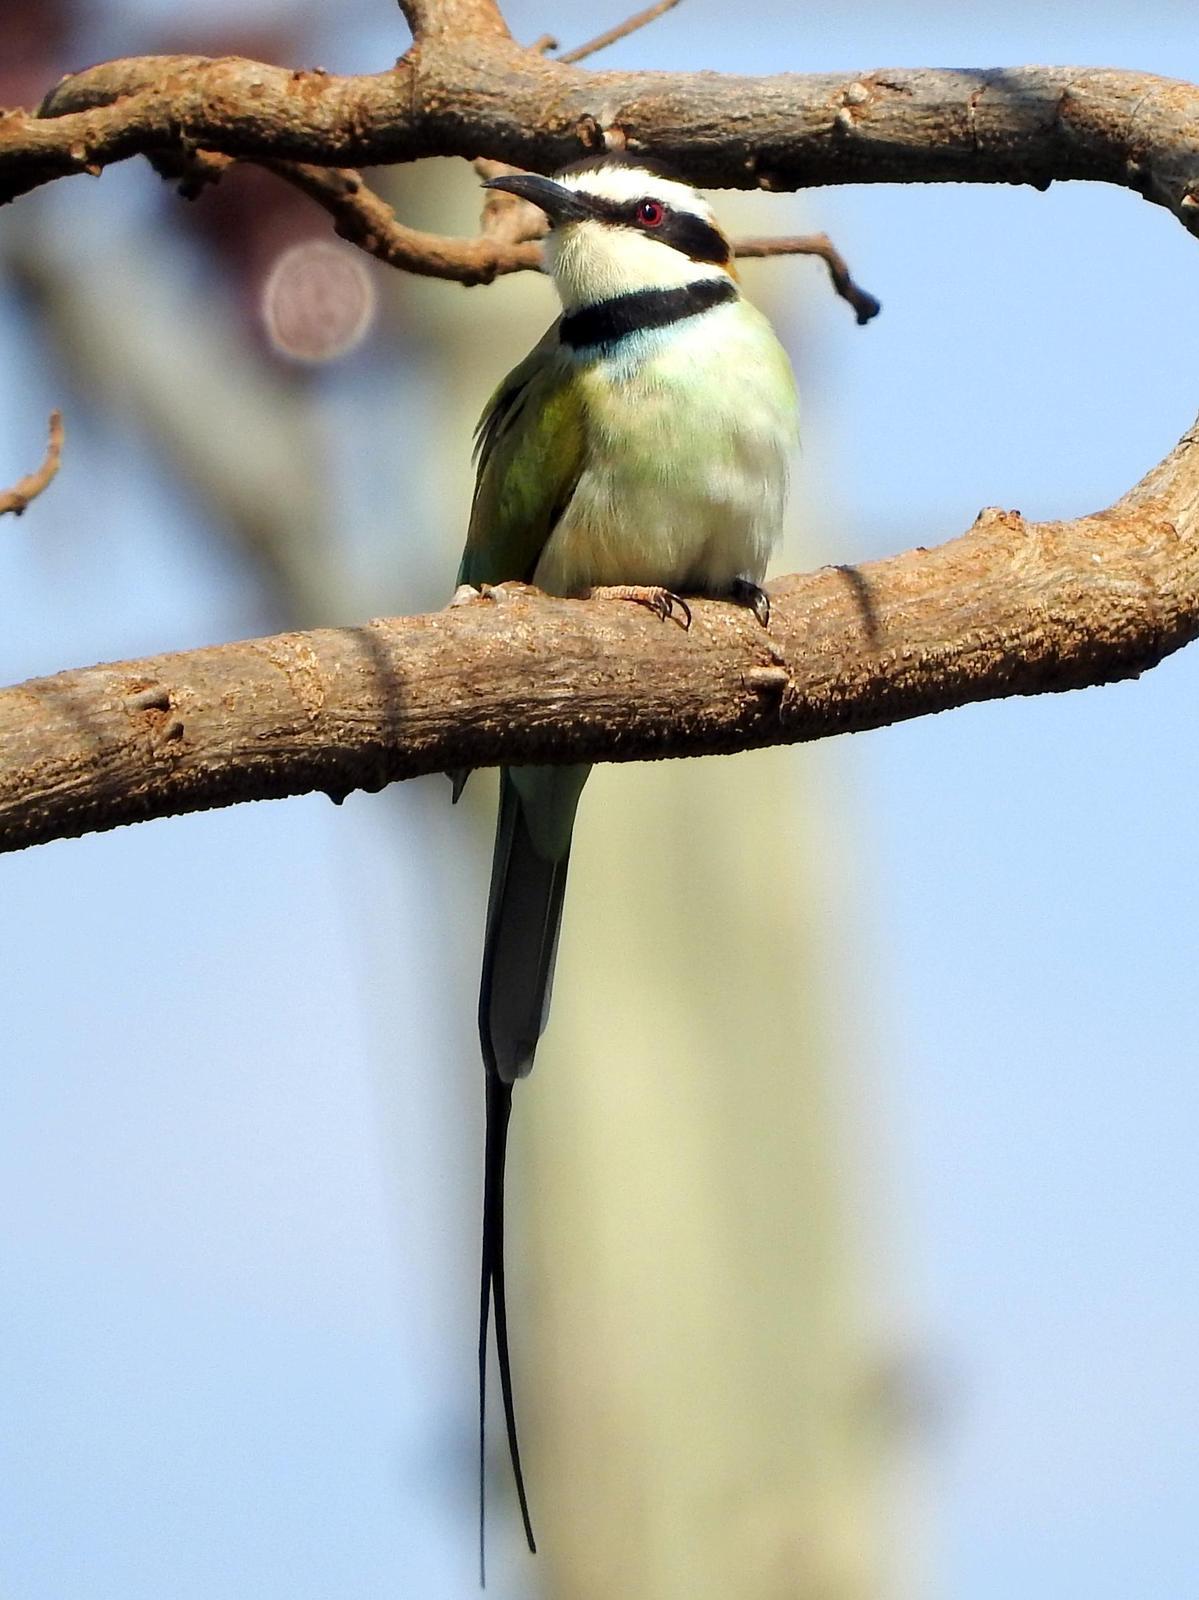 White-throated Bee-eater Photo by Todd A. Watkins